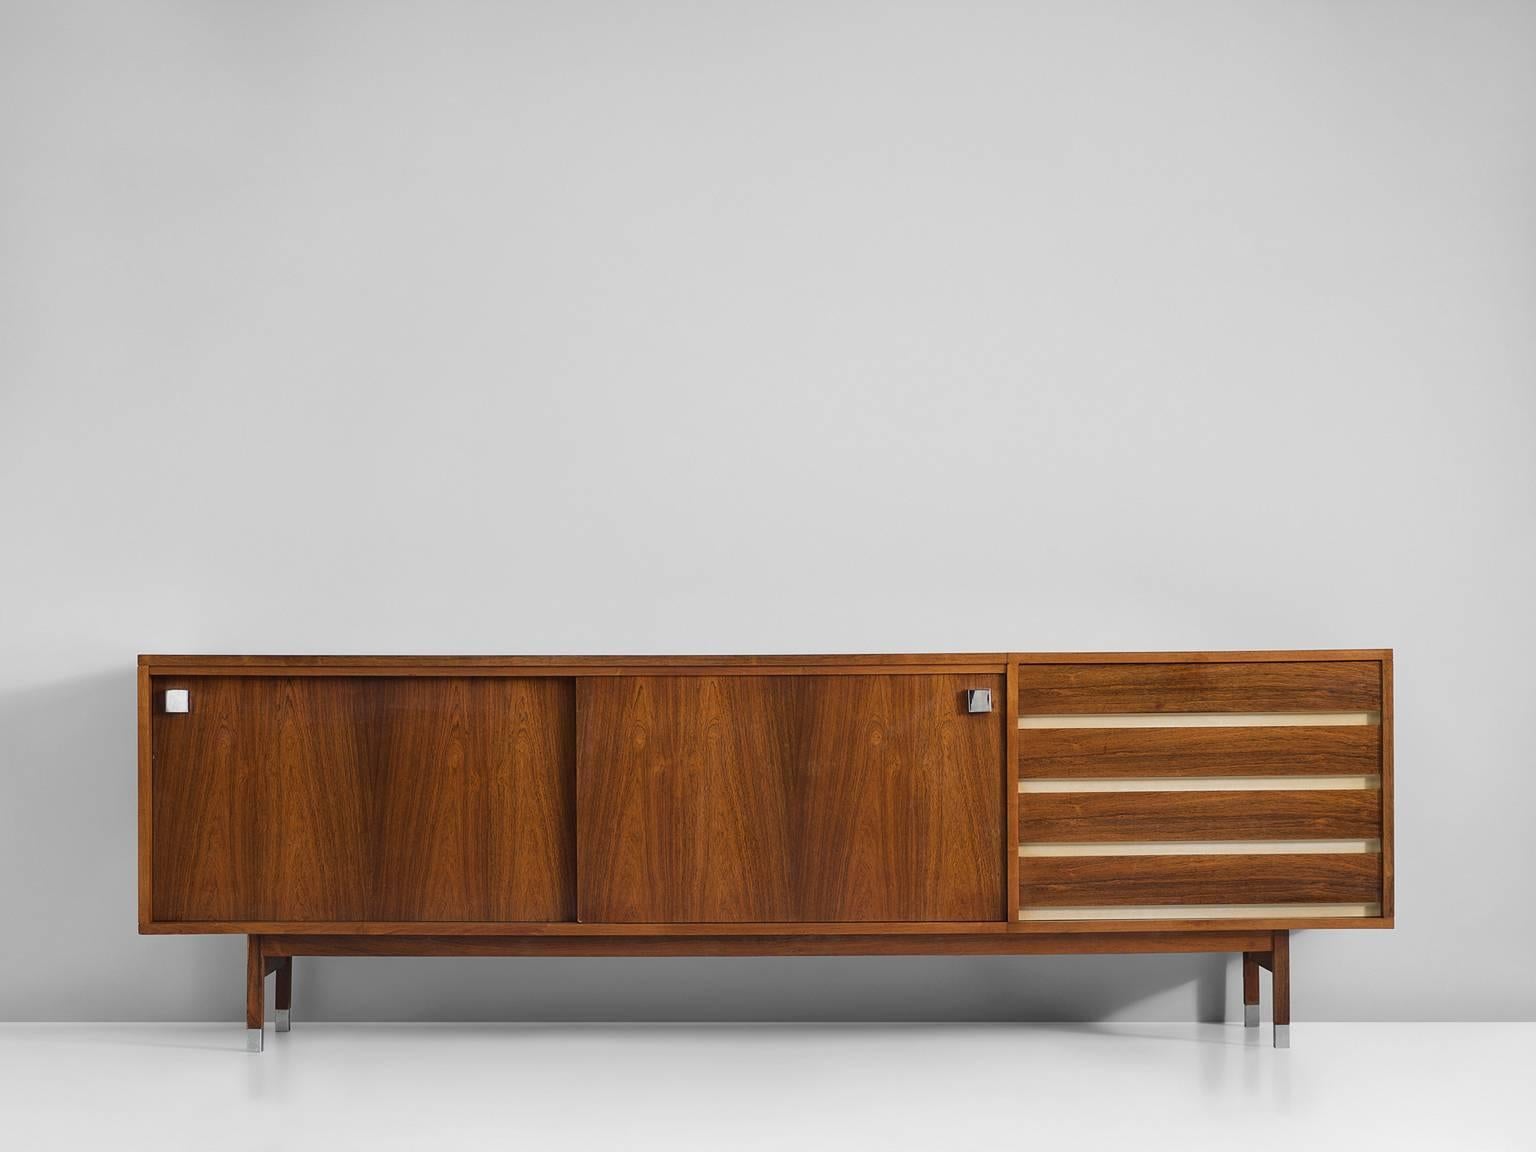 Sideboard in rosewood, by Alfred Hendrickx for Belform, Belgium, 1960s. 

Large sideboard in rosewood. This credenza consist of two sliding doors with characteristic black square metal handles. The design of this model is simplistic, with great